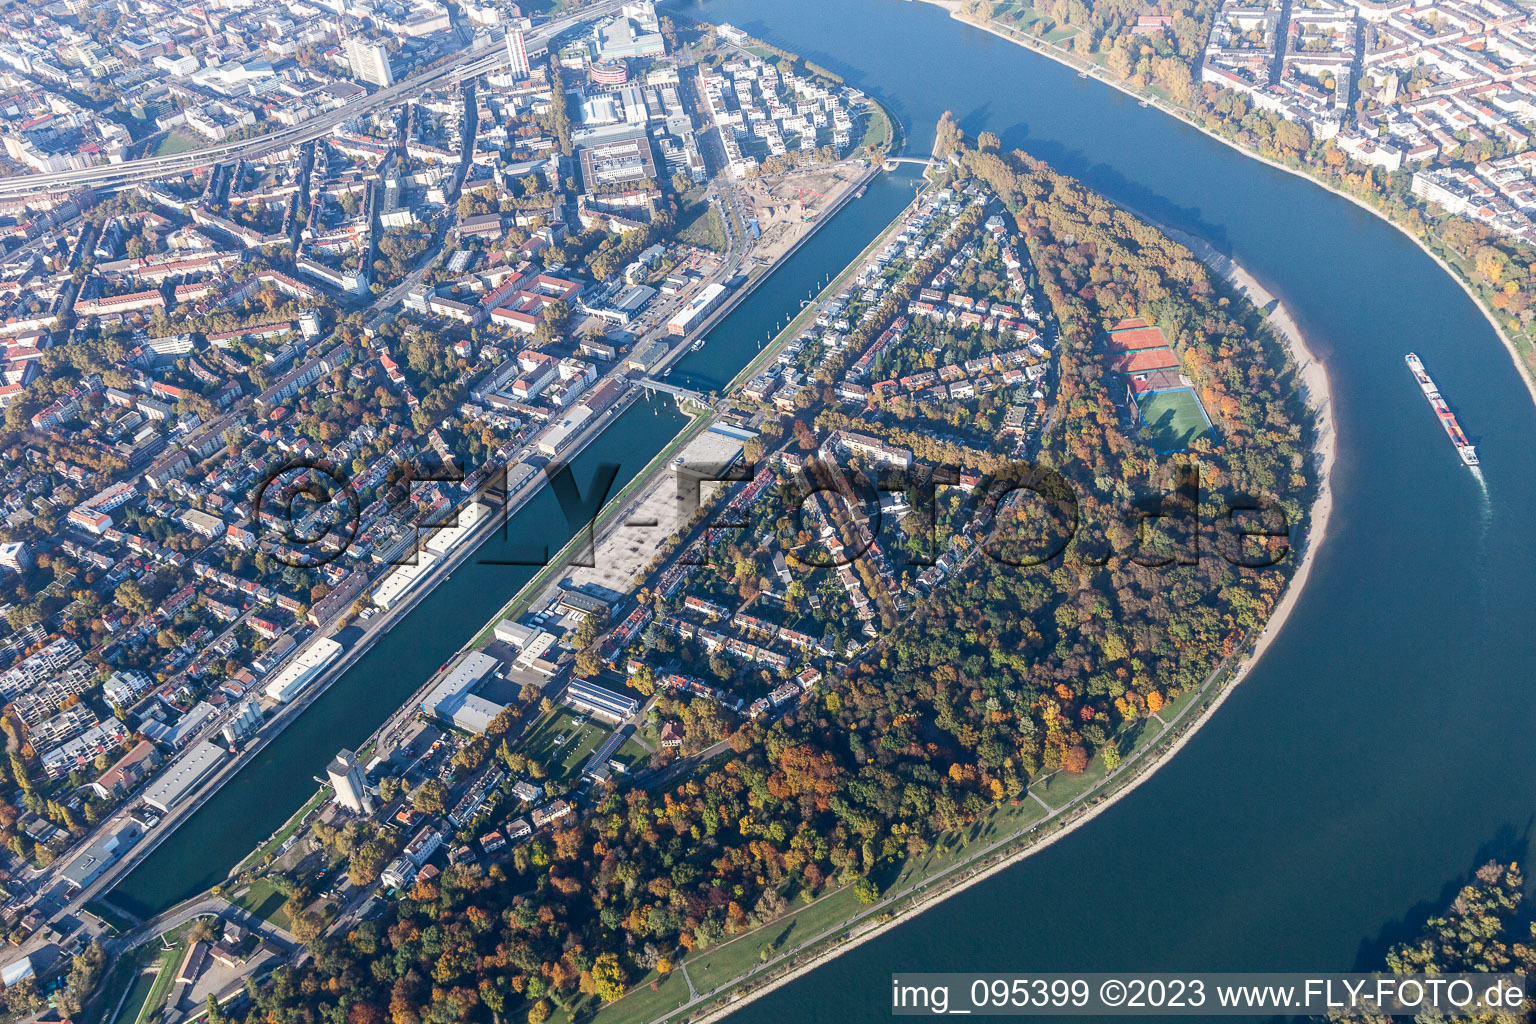 Aerial view of Park Island in the district Süd in Ludwigshafen am Rhein in the state Rhineland-Palatinate, Germany